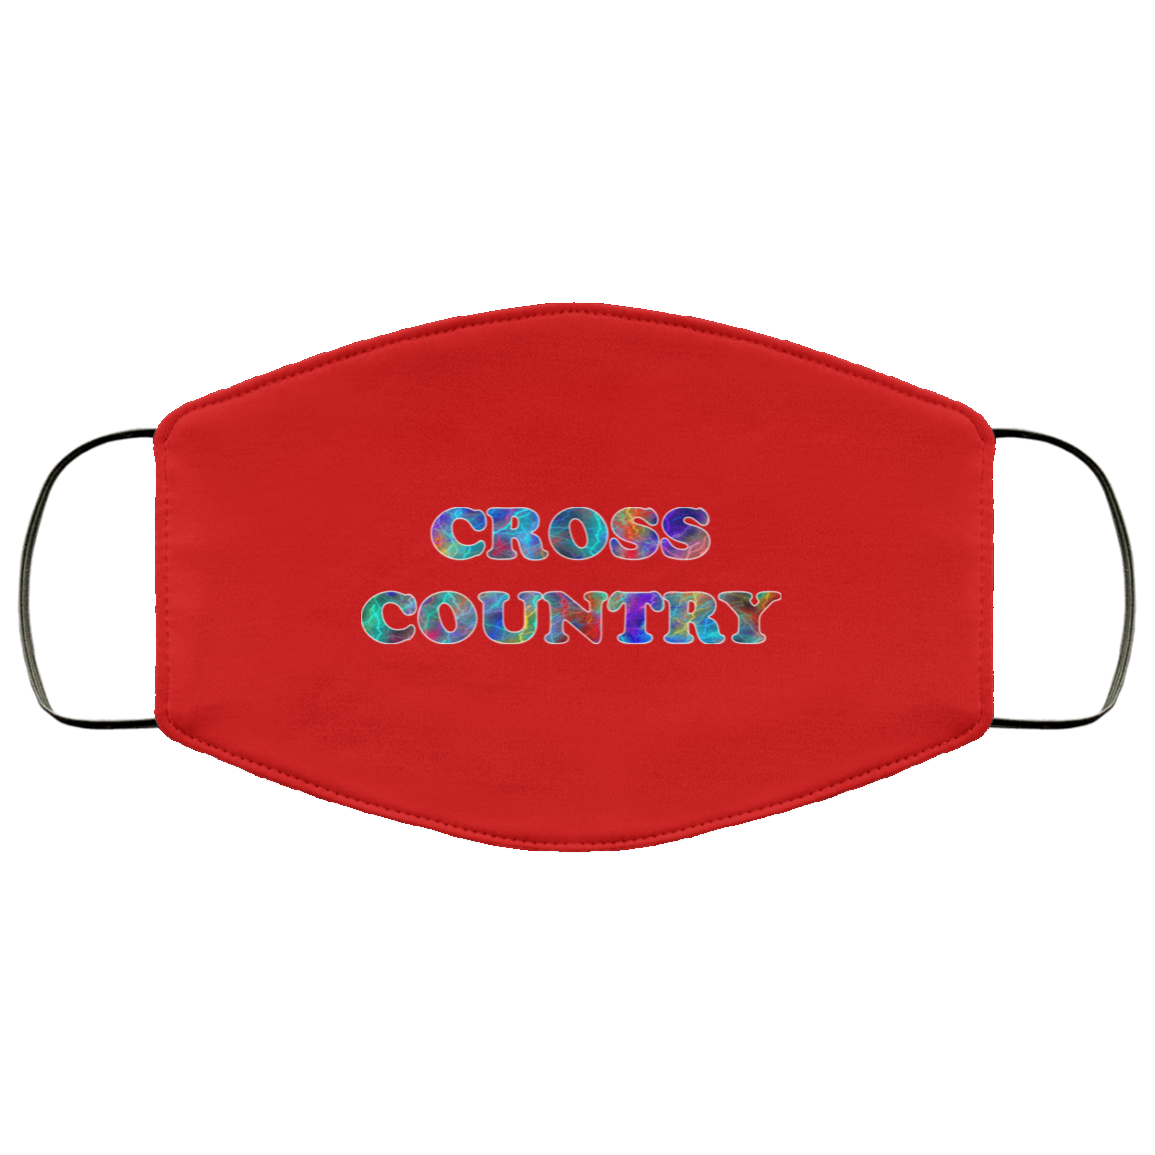 Cross Country 2 Layer Protective Mask